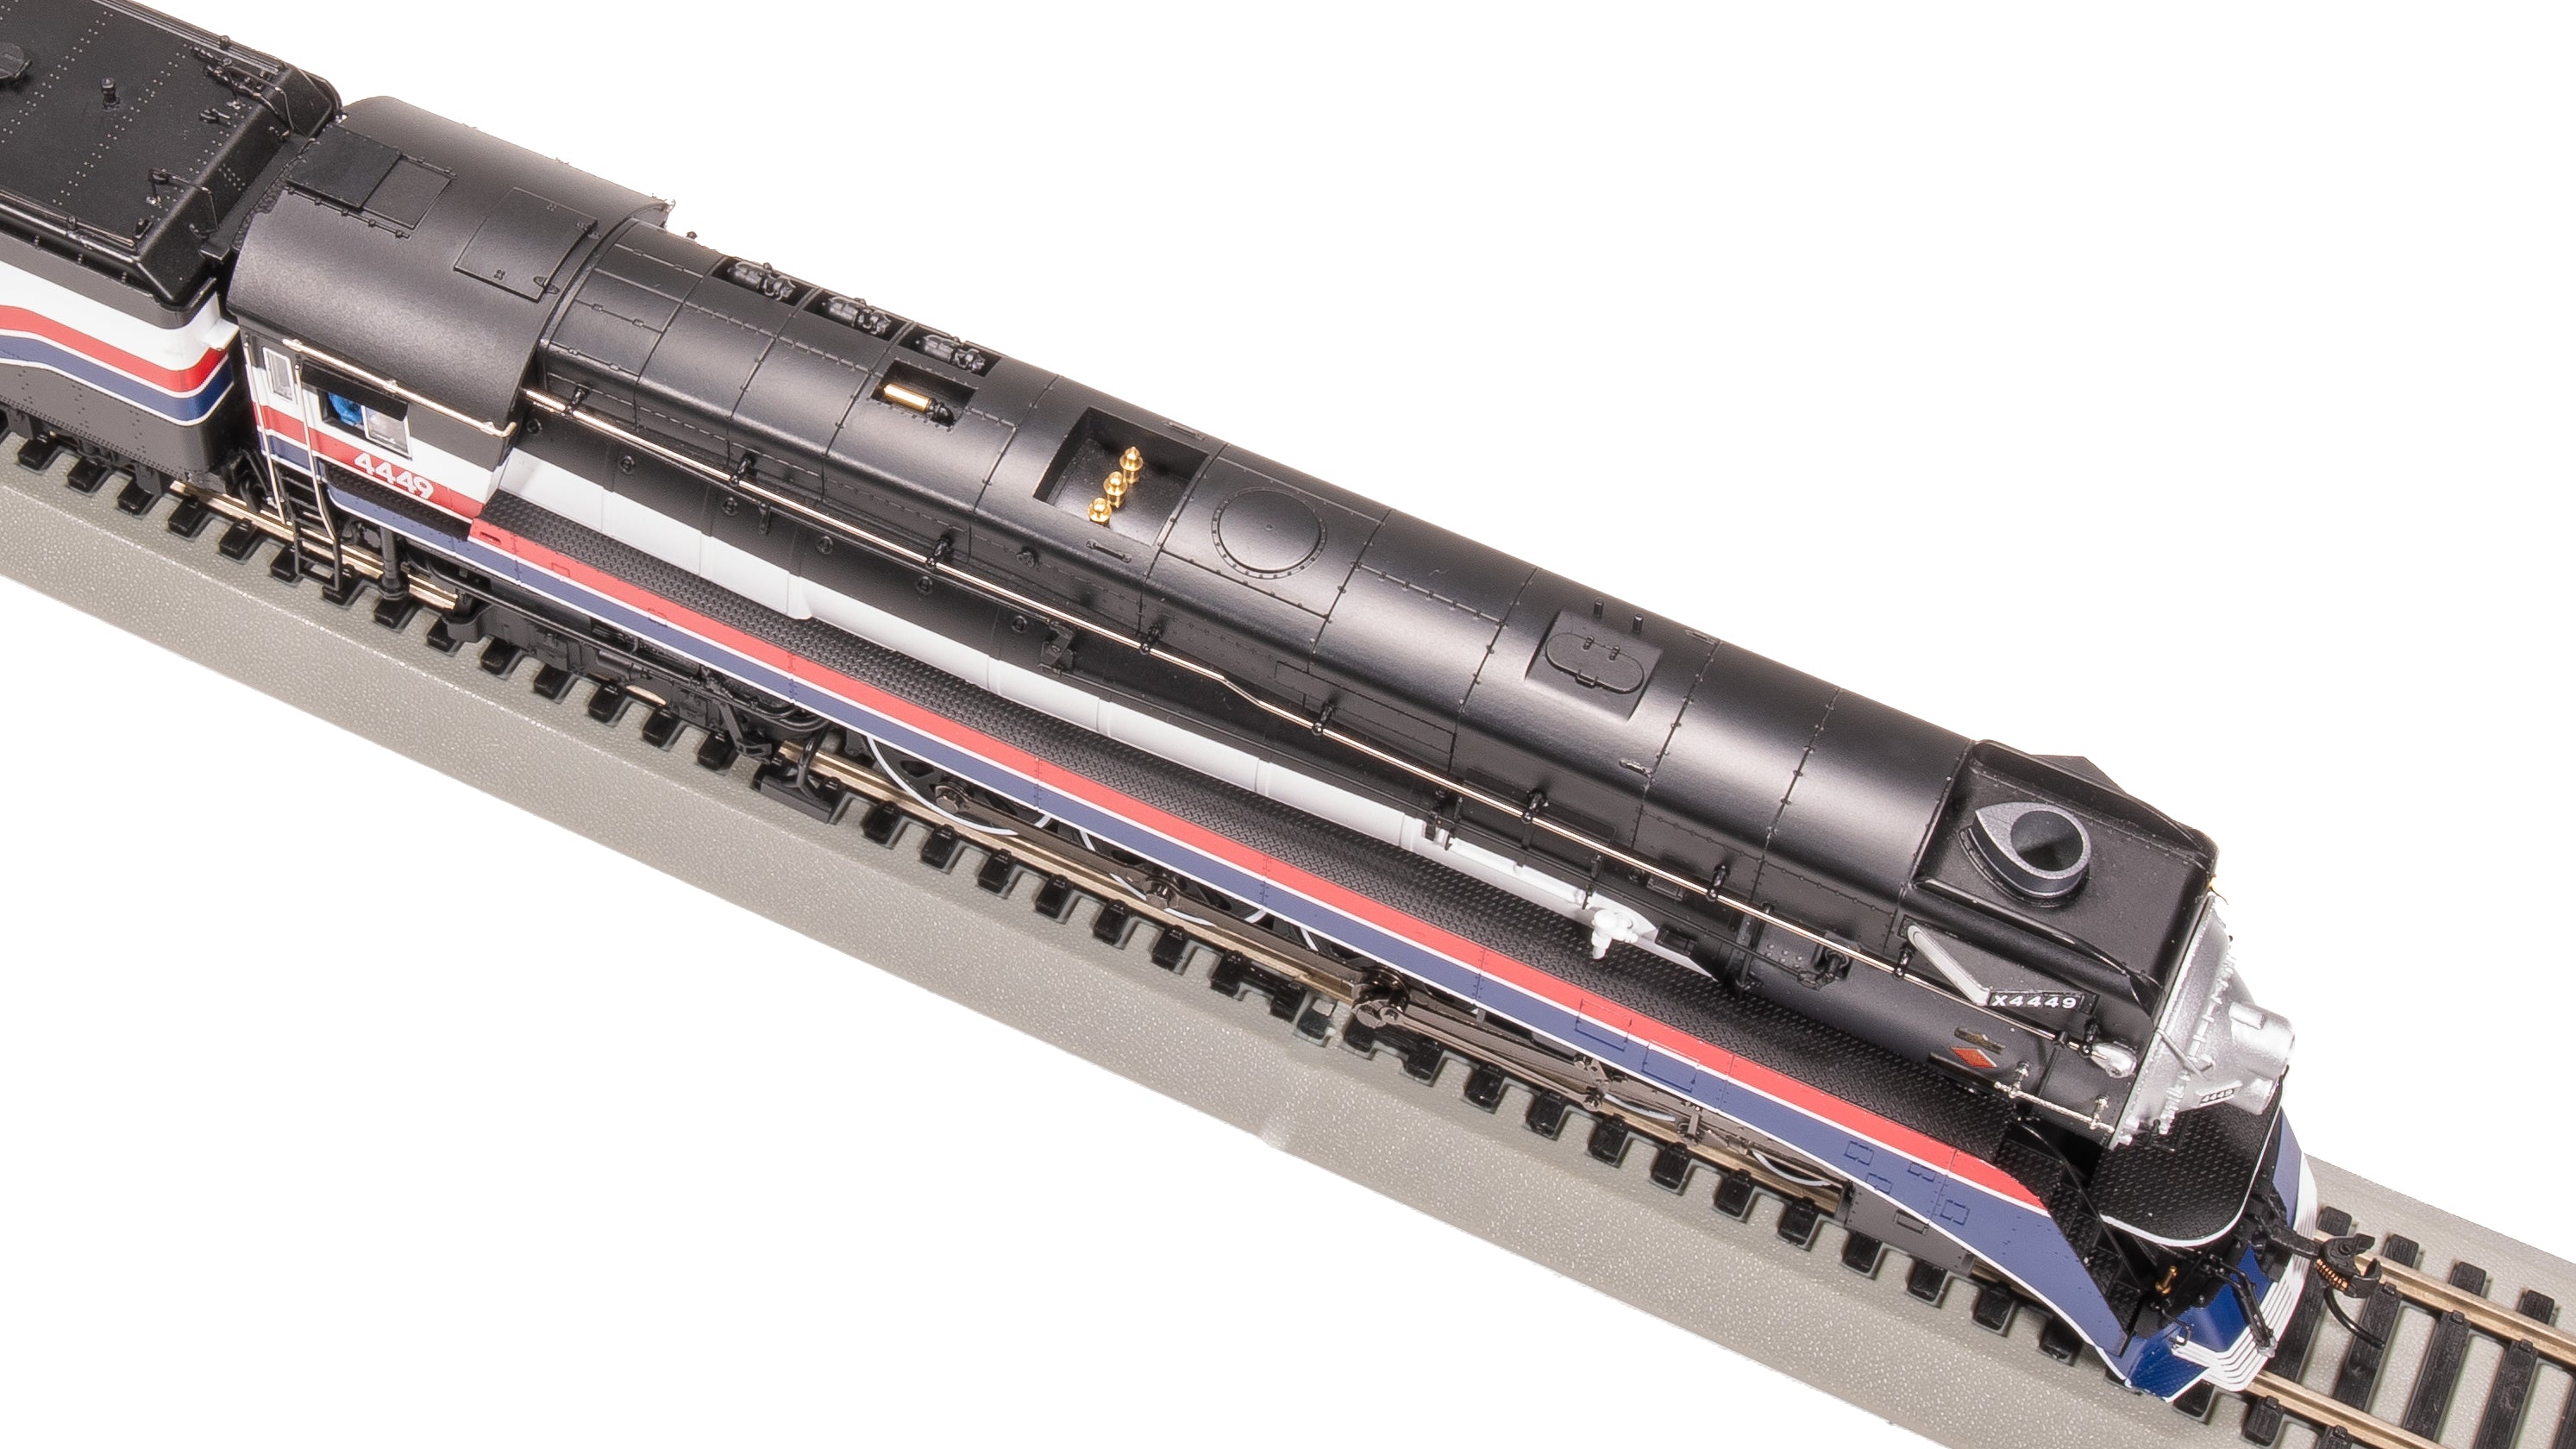 7612 Southern Pacific GS-4, #4449, 1975 American Freedom Train, Paragon4 Sound/DC/DCC, Smoke, HO